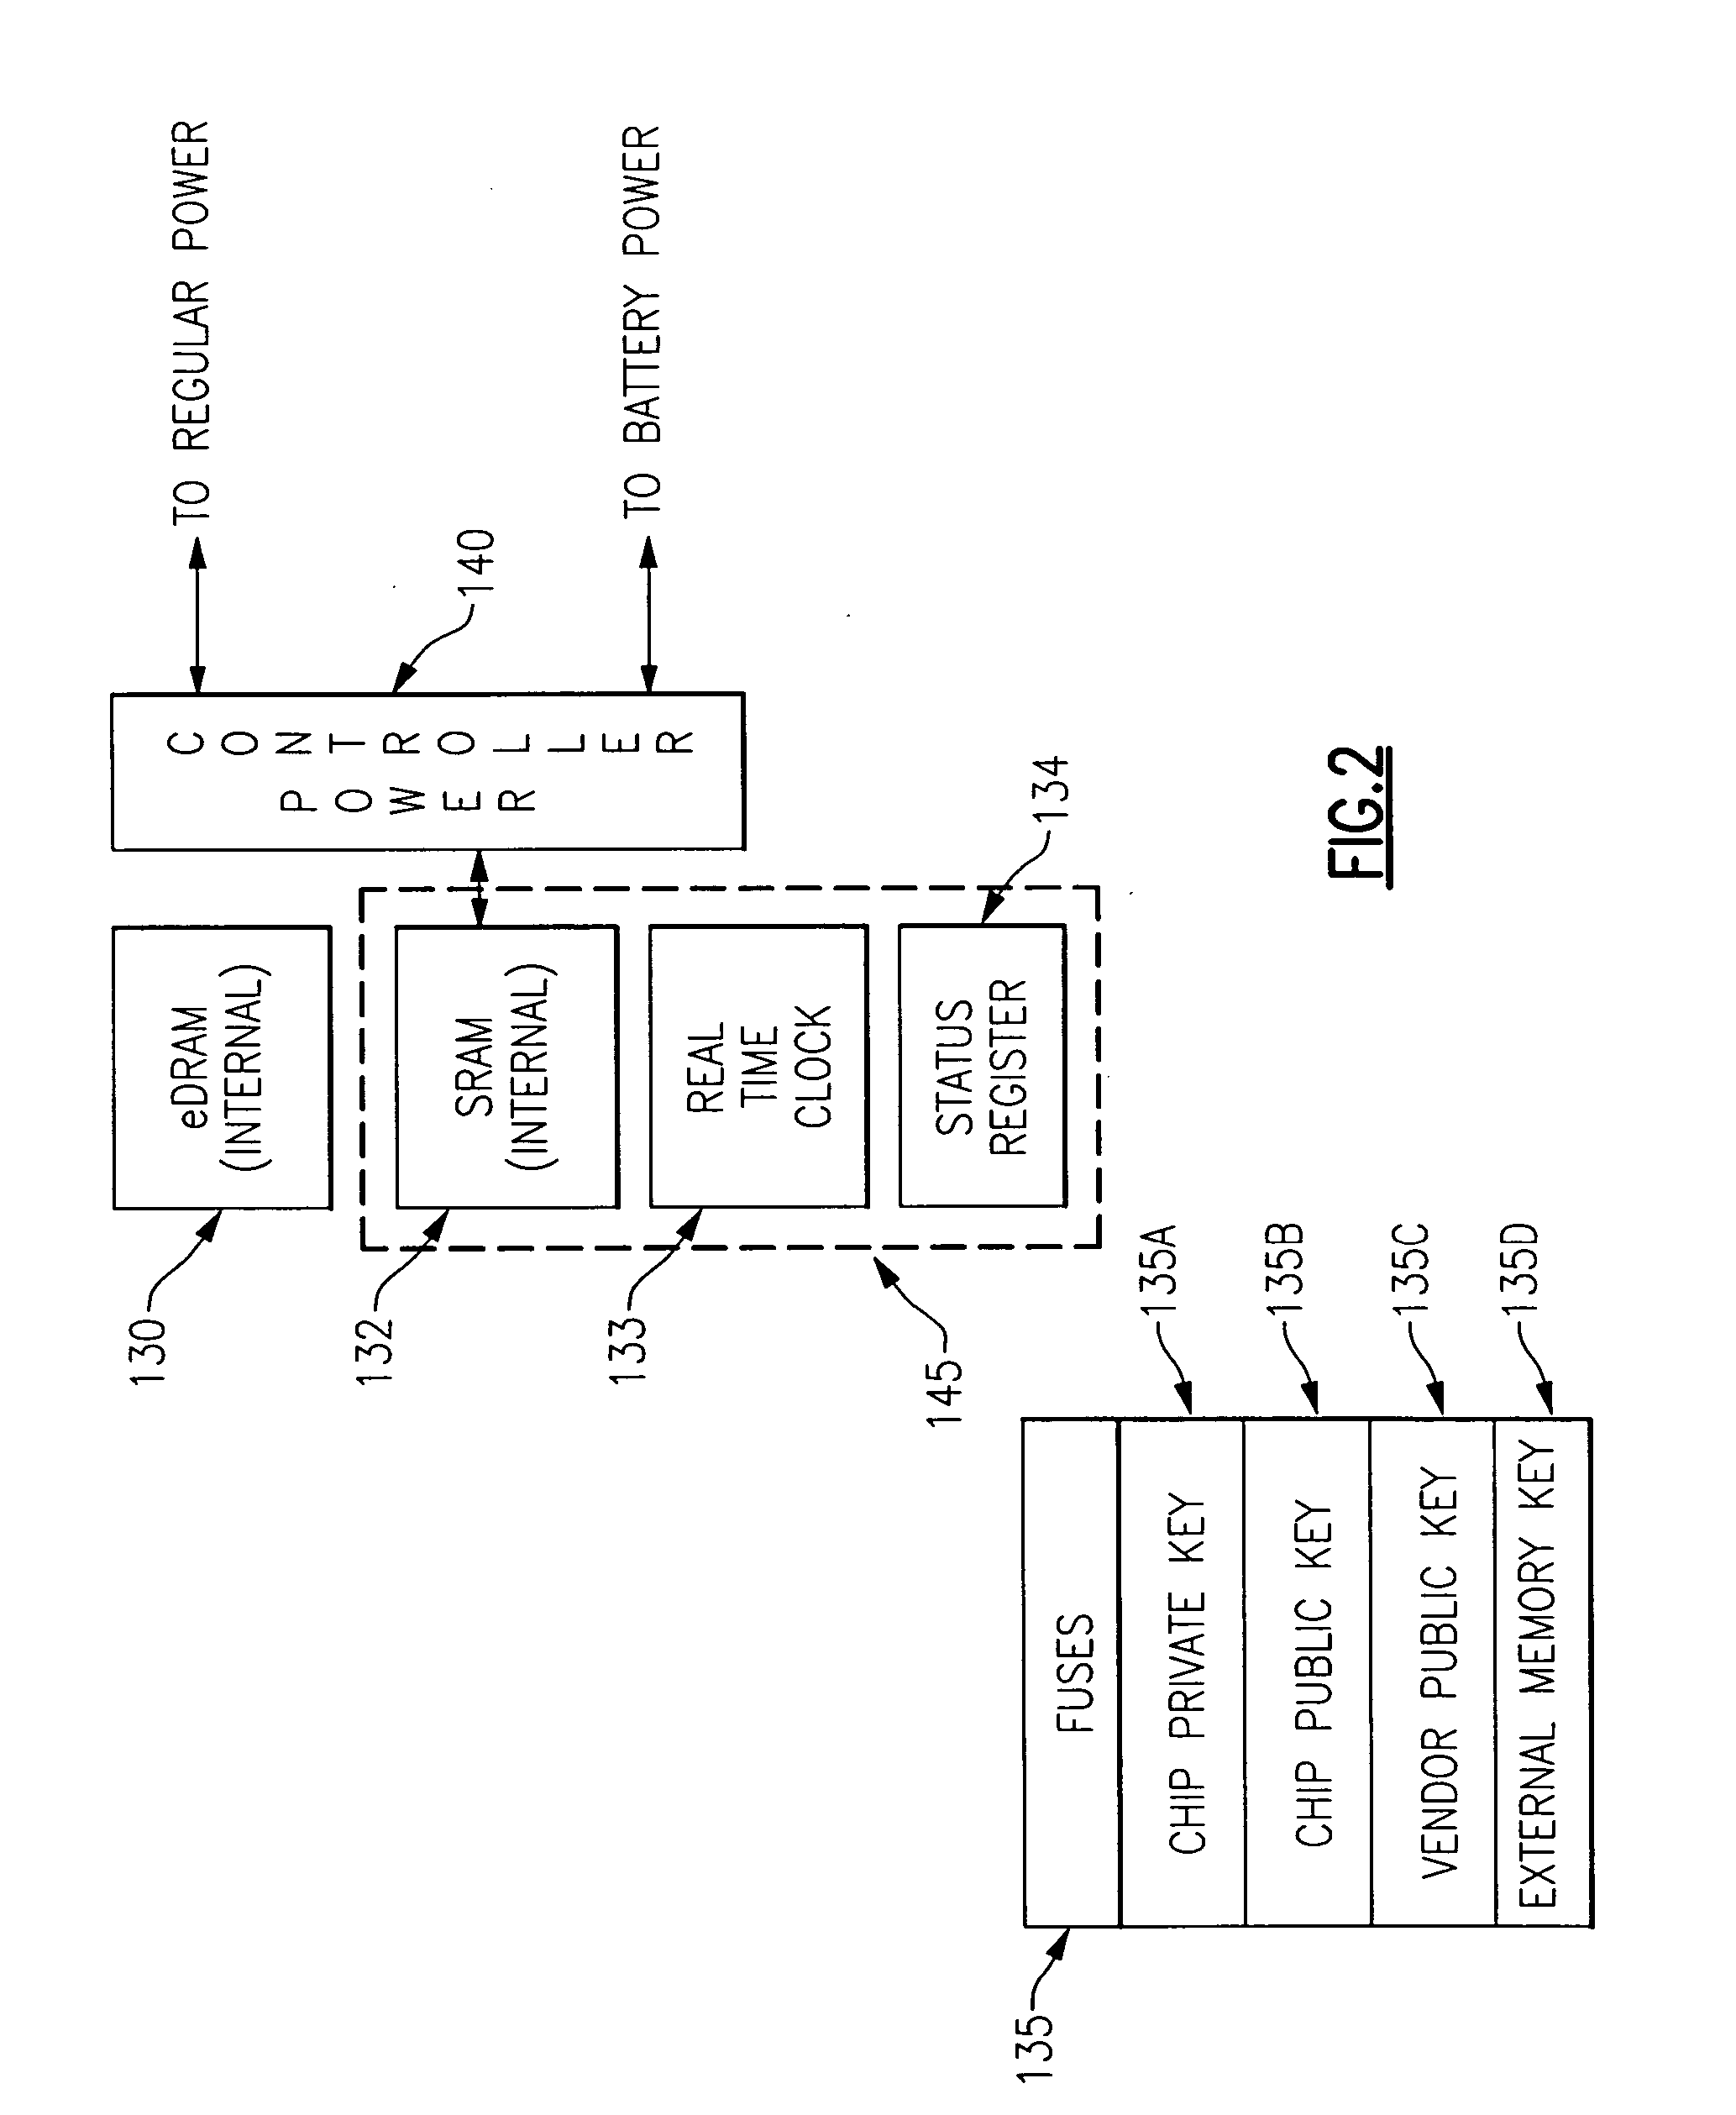 System for securely configuring a field programmable gate array or other programmable hardware